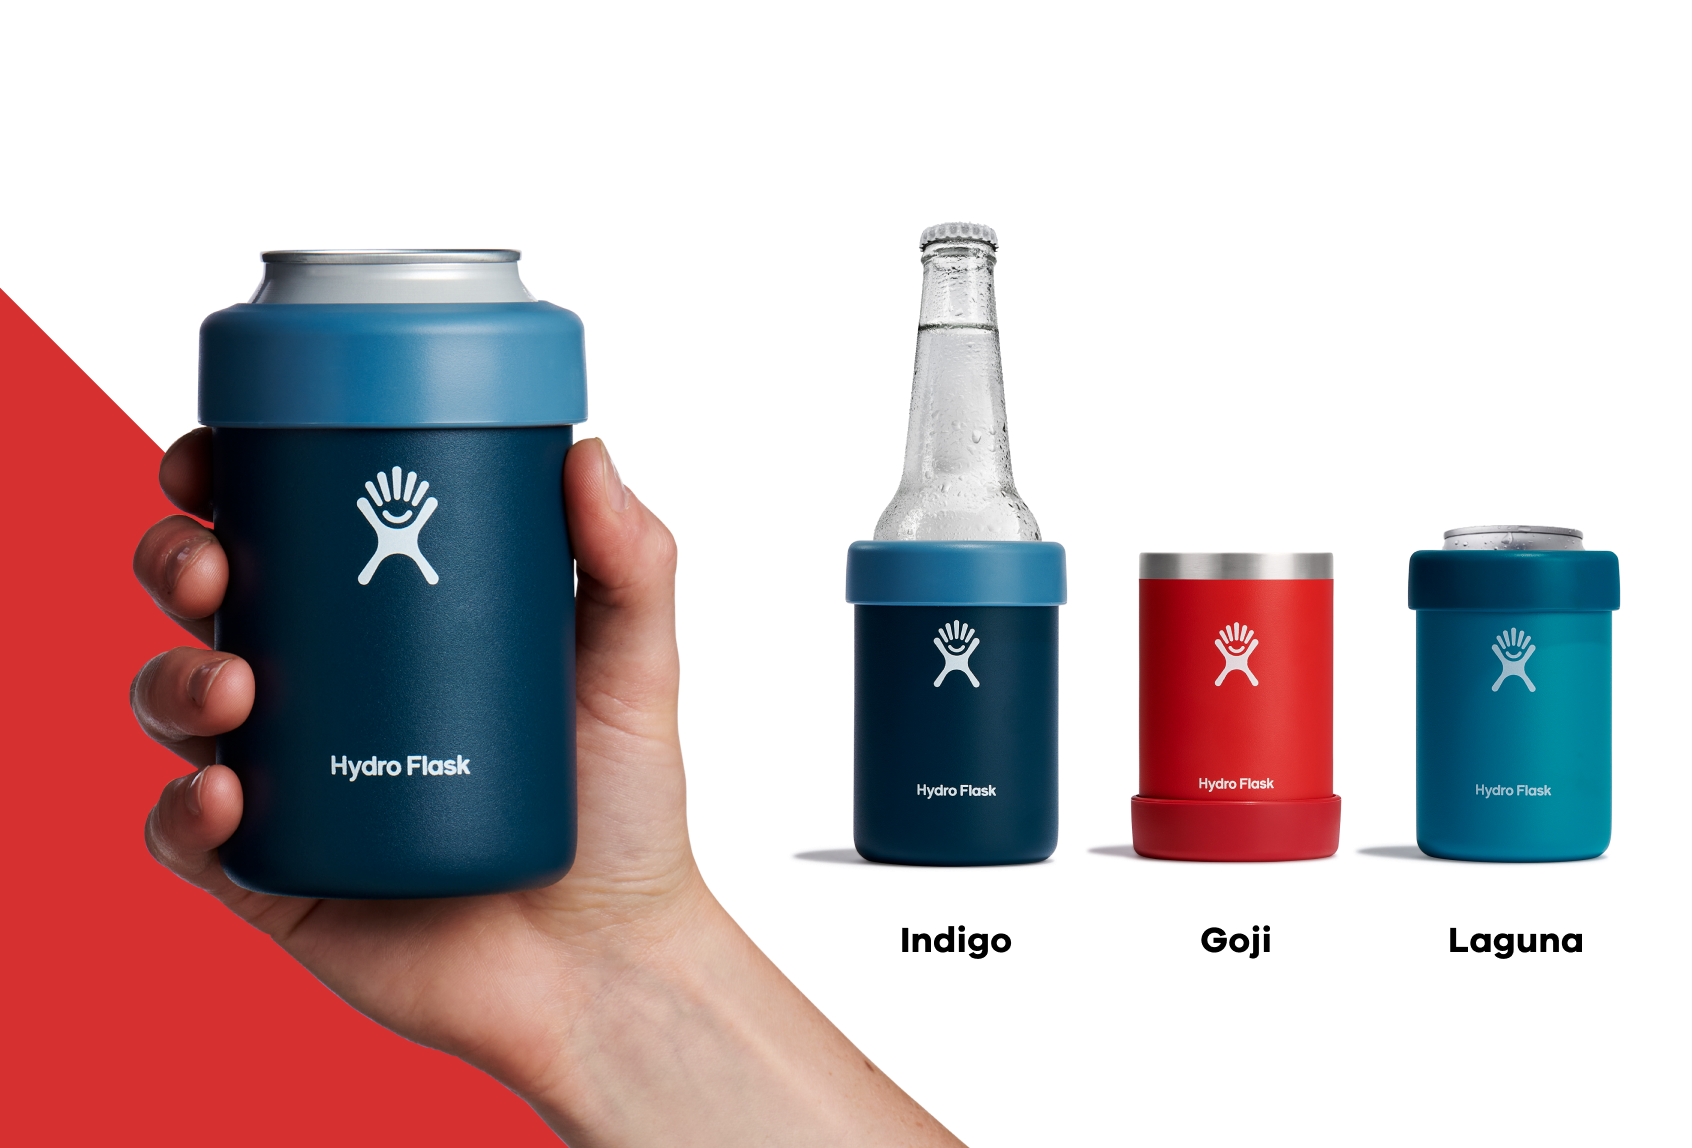 Hydro Flask Coupons